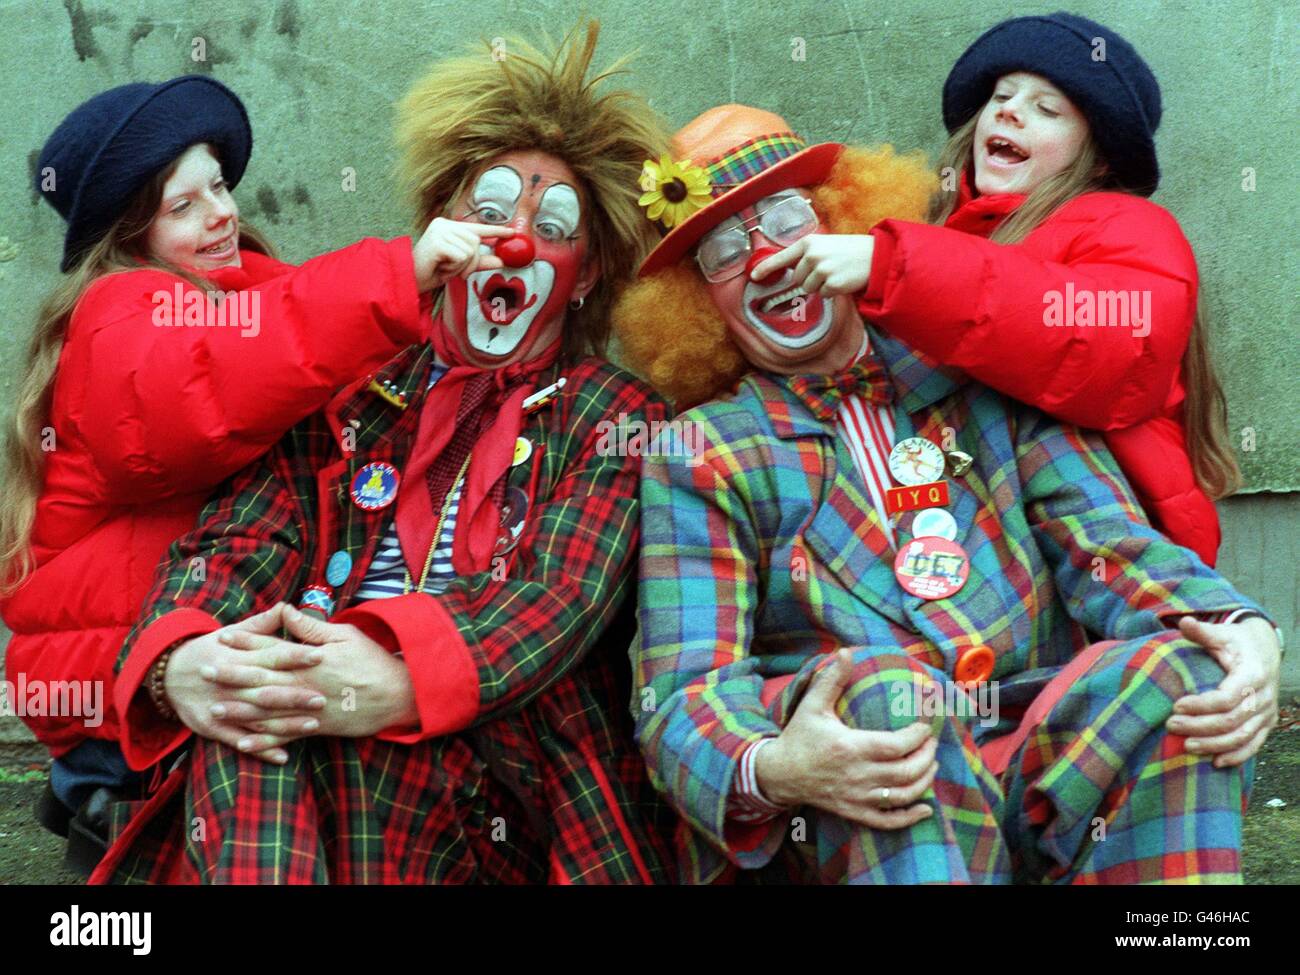 Ten-year-old twins Nicky (l) and Sarah (r) Amey 'clown' around with Kiku (cen l) and Dez Colona as part of the annual Grimaldi service in London's East End today (Sun) to celebrate the life of Joseph Grimaldi. Photo by Fiona Hanson/PA. Stock Photo